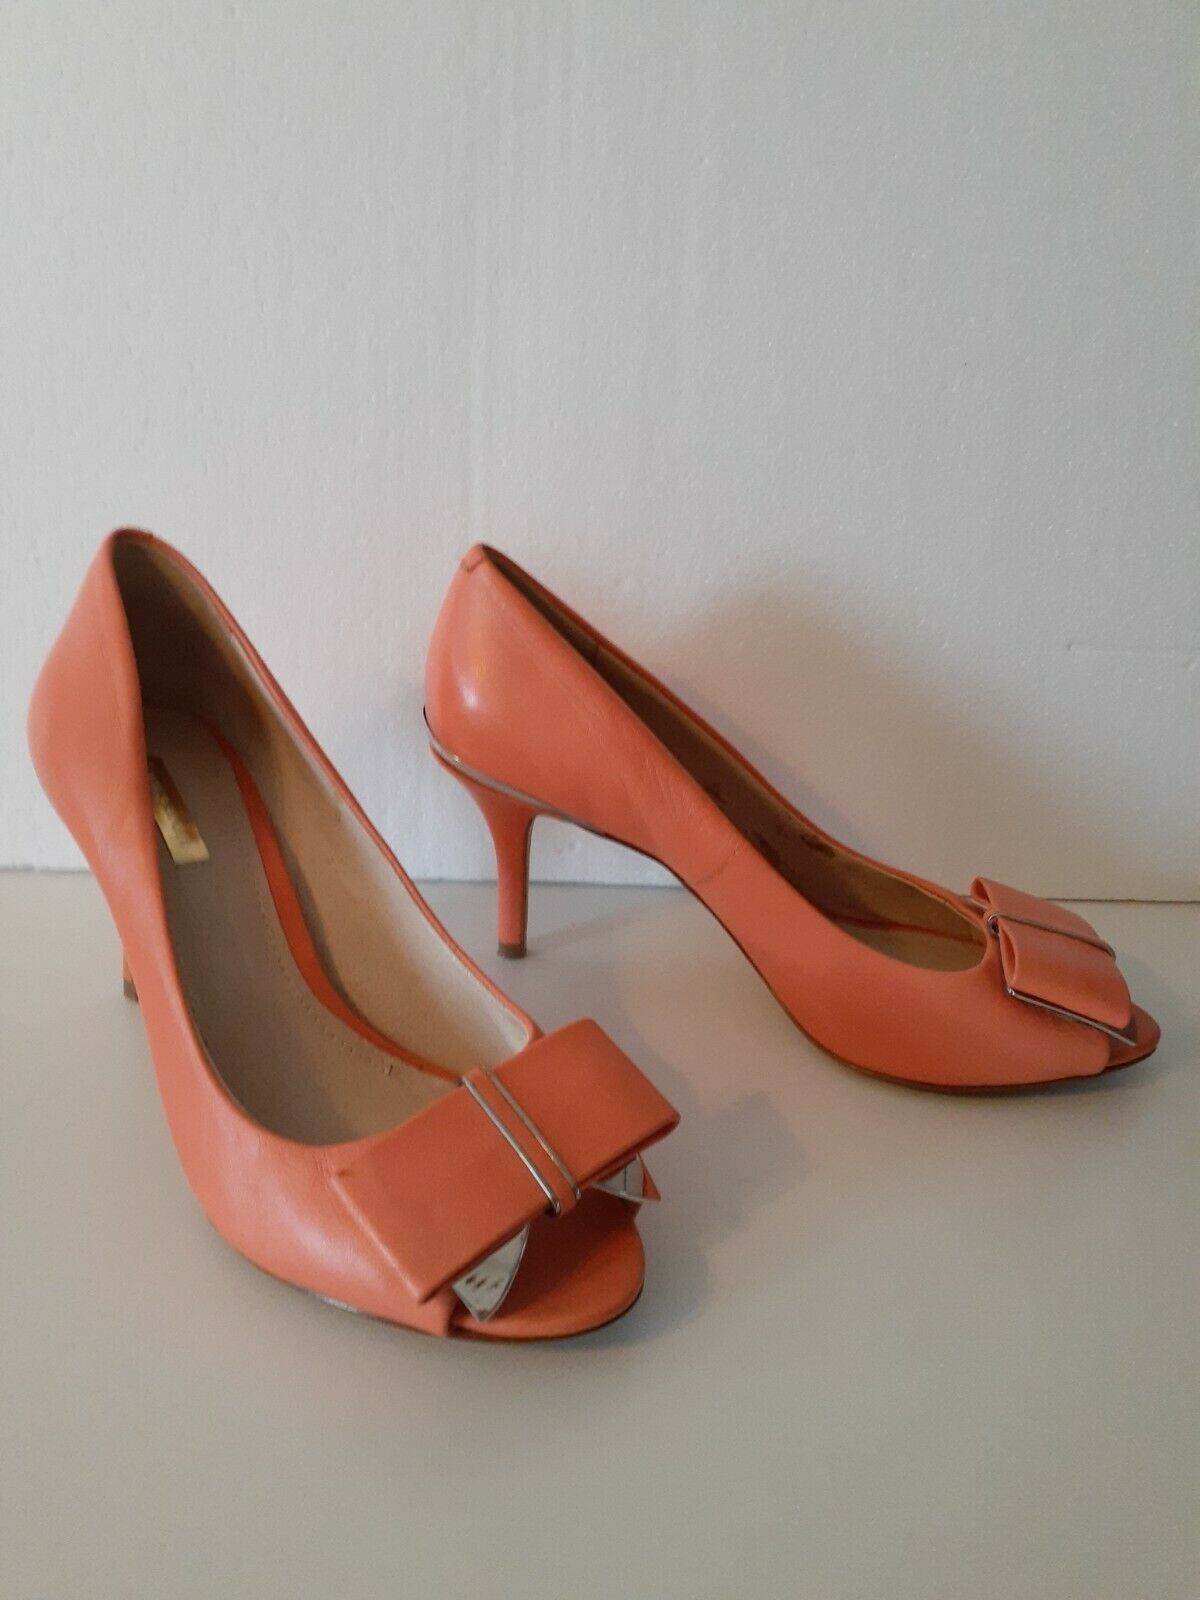 CLEARANCE* Louise et Cie Nadia Shoes peach leather heels bow Women's Size 8.5